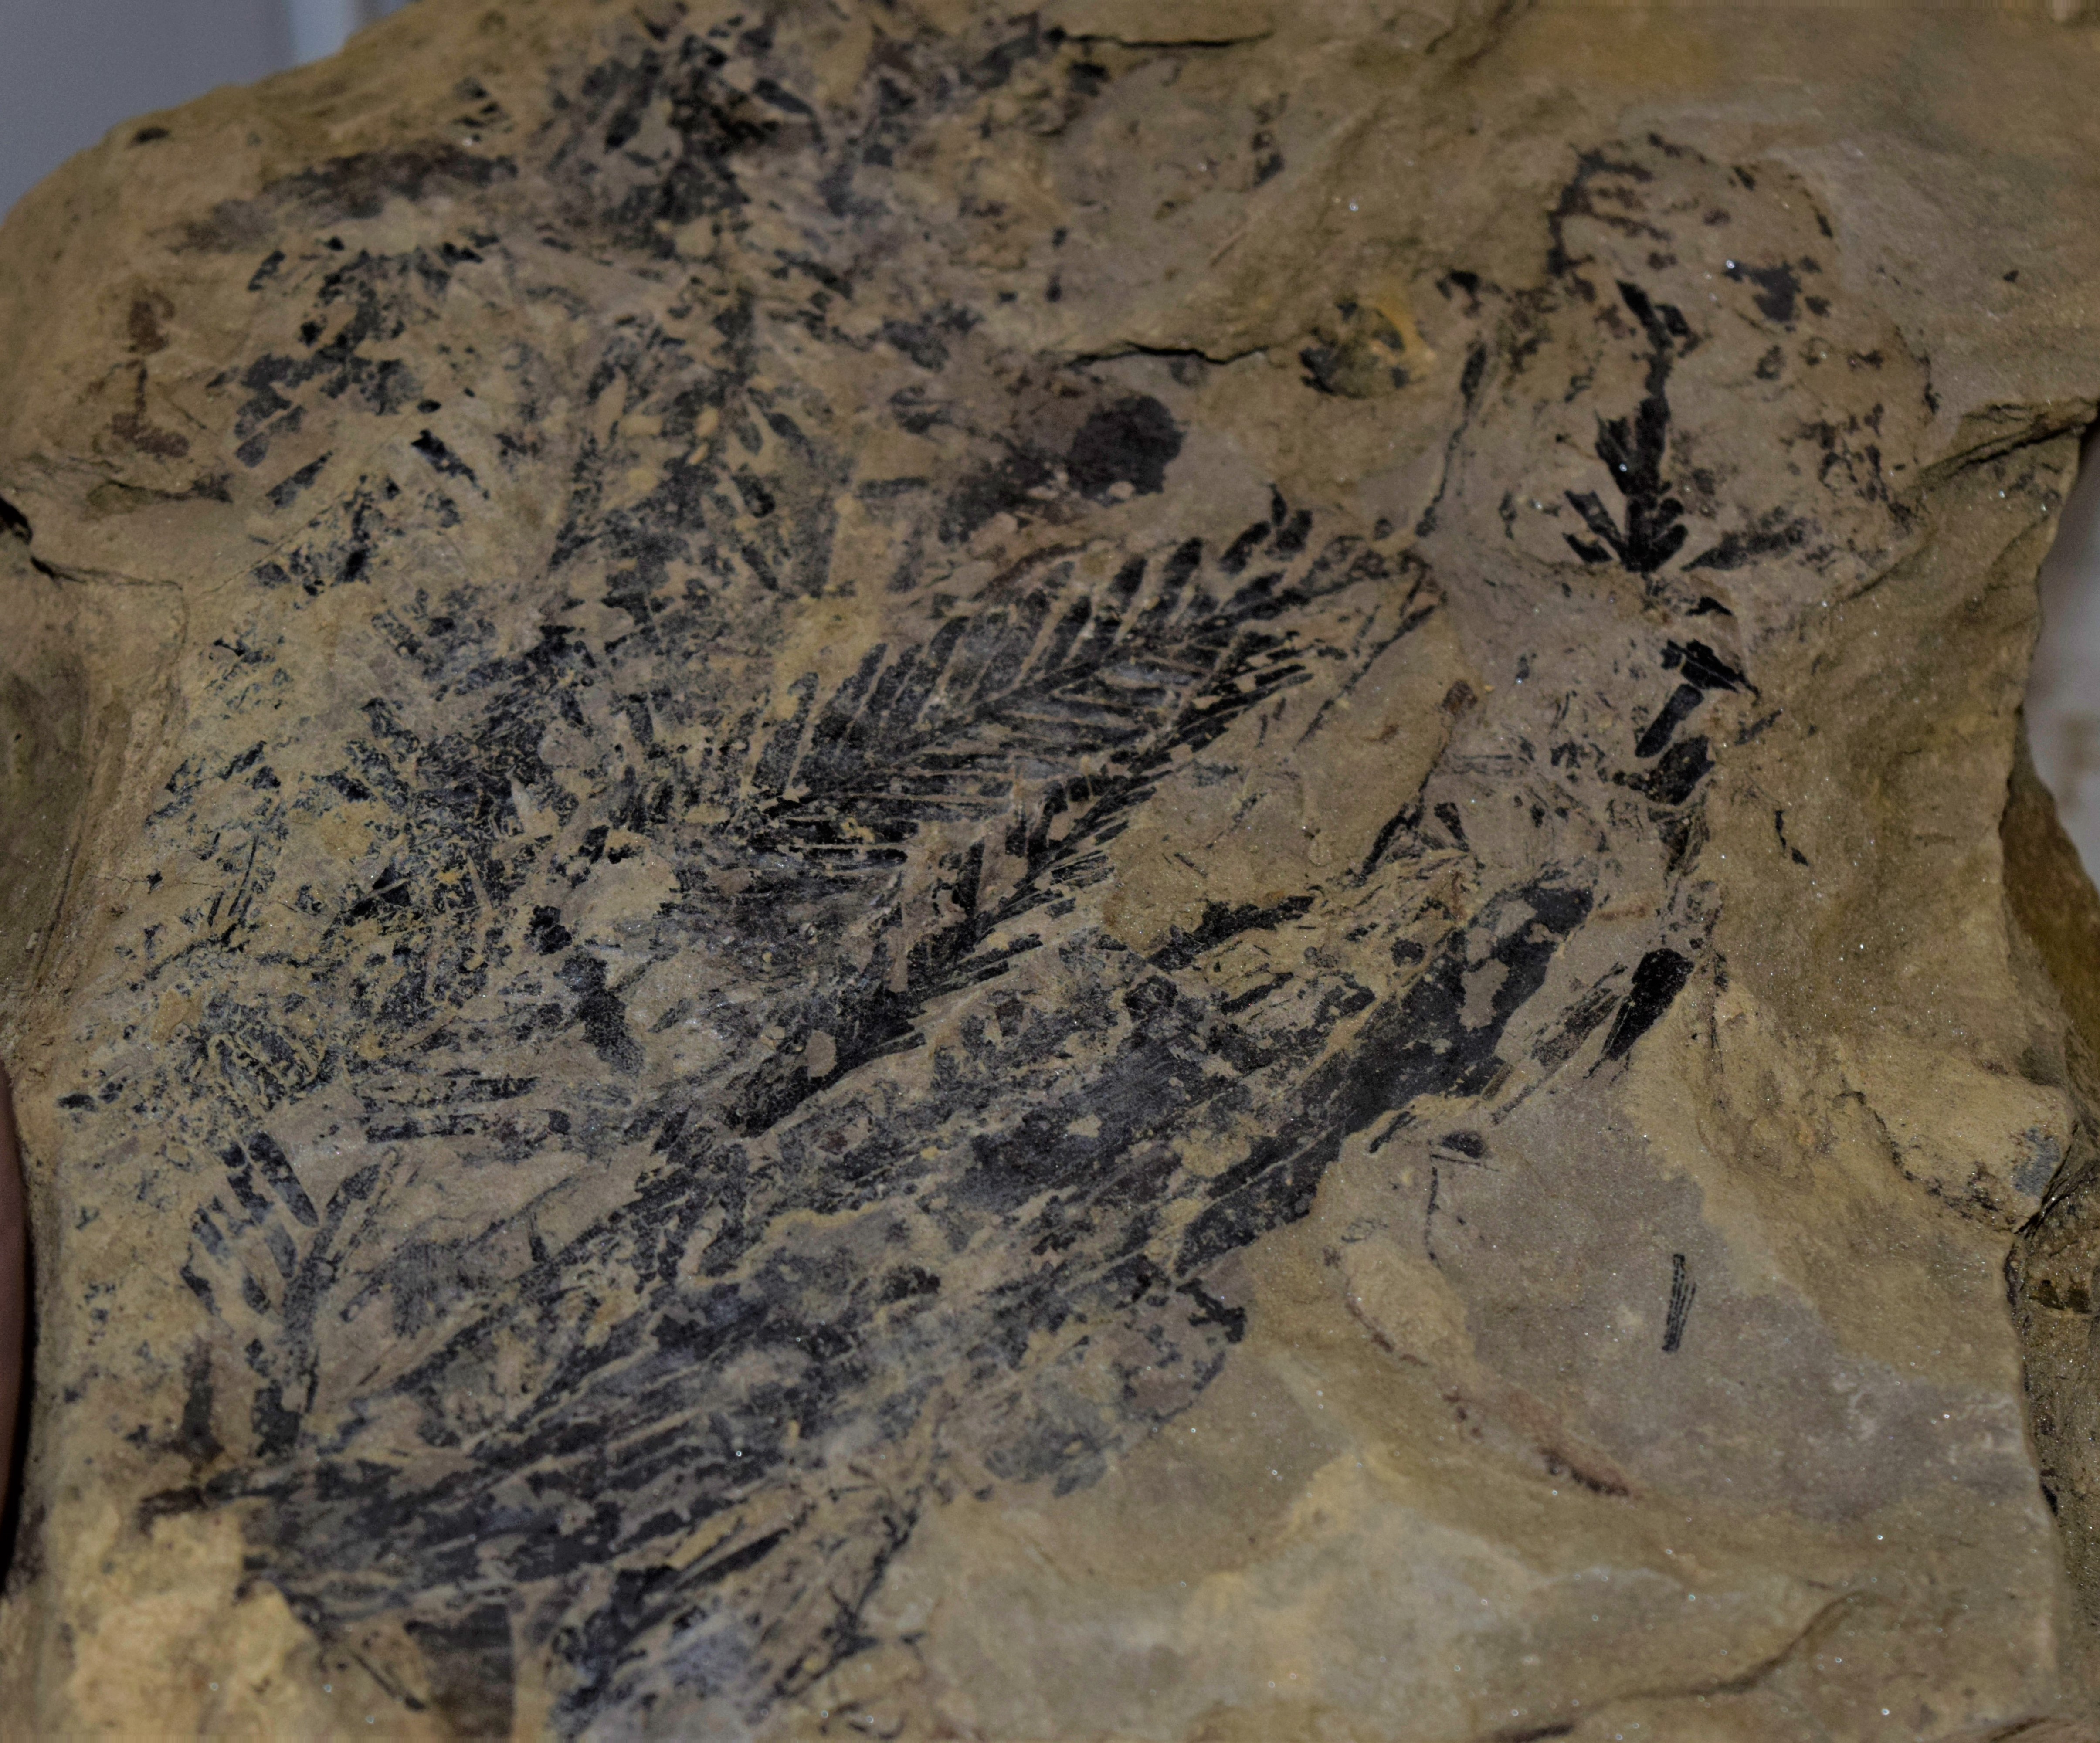 Plant stems and fern fronds from the Ashland Triassic Site